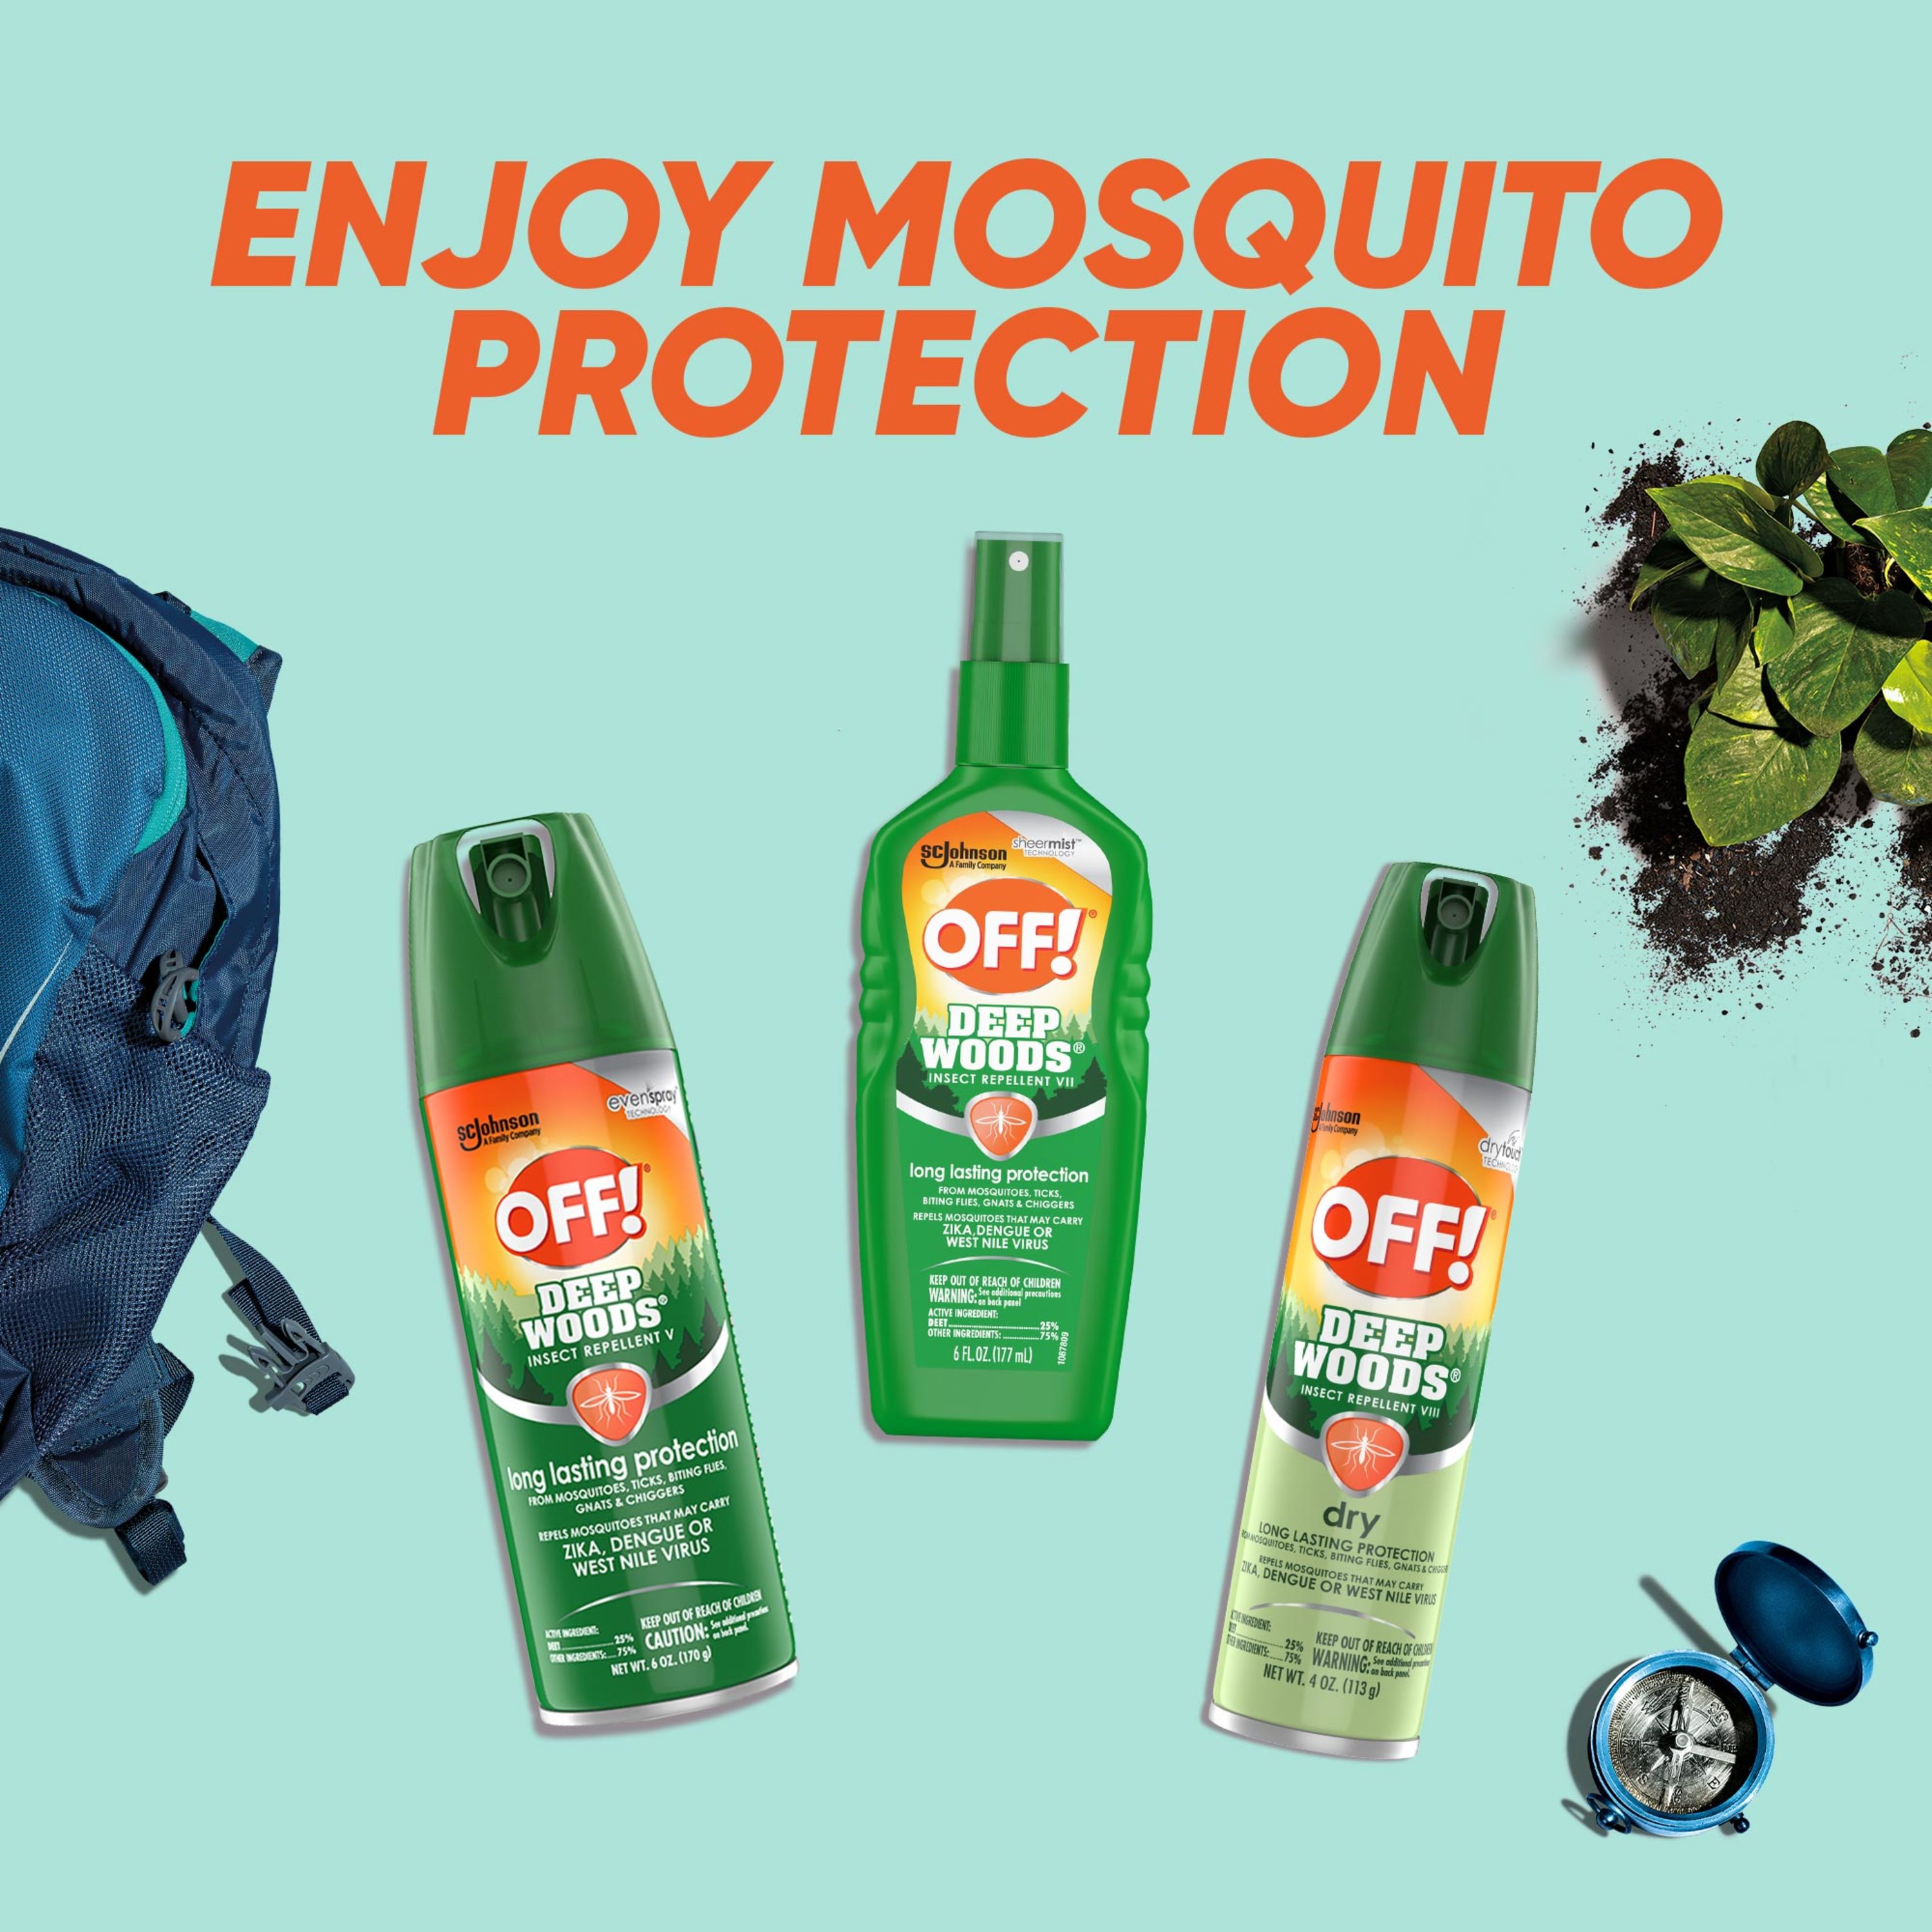 OFF! Deep Woods Non-Greasy Mosquito Repellent Dry Bug Spray with DEET, 4 oz, 2 Count - image 11 of 16